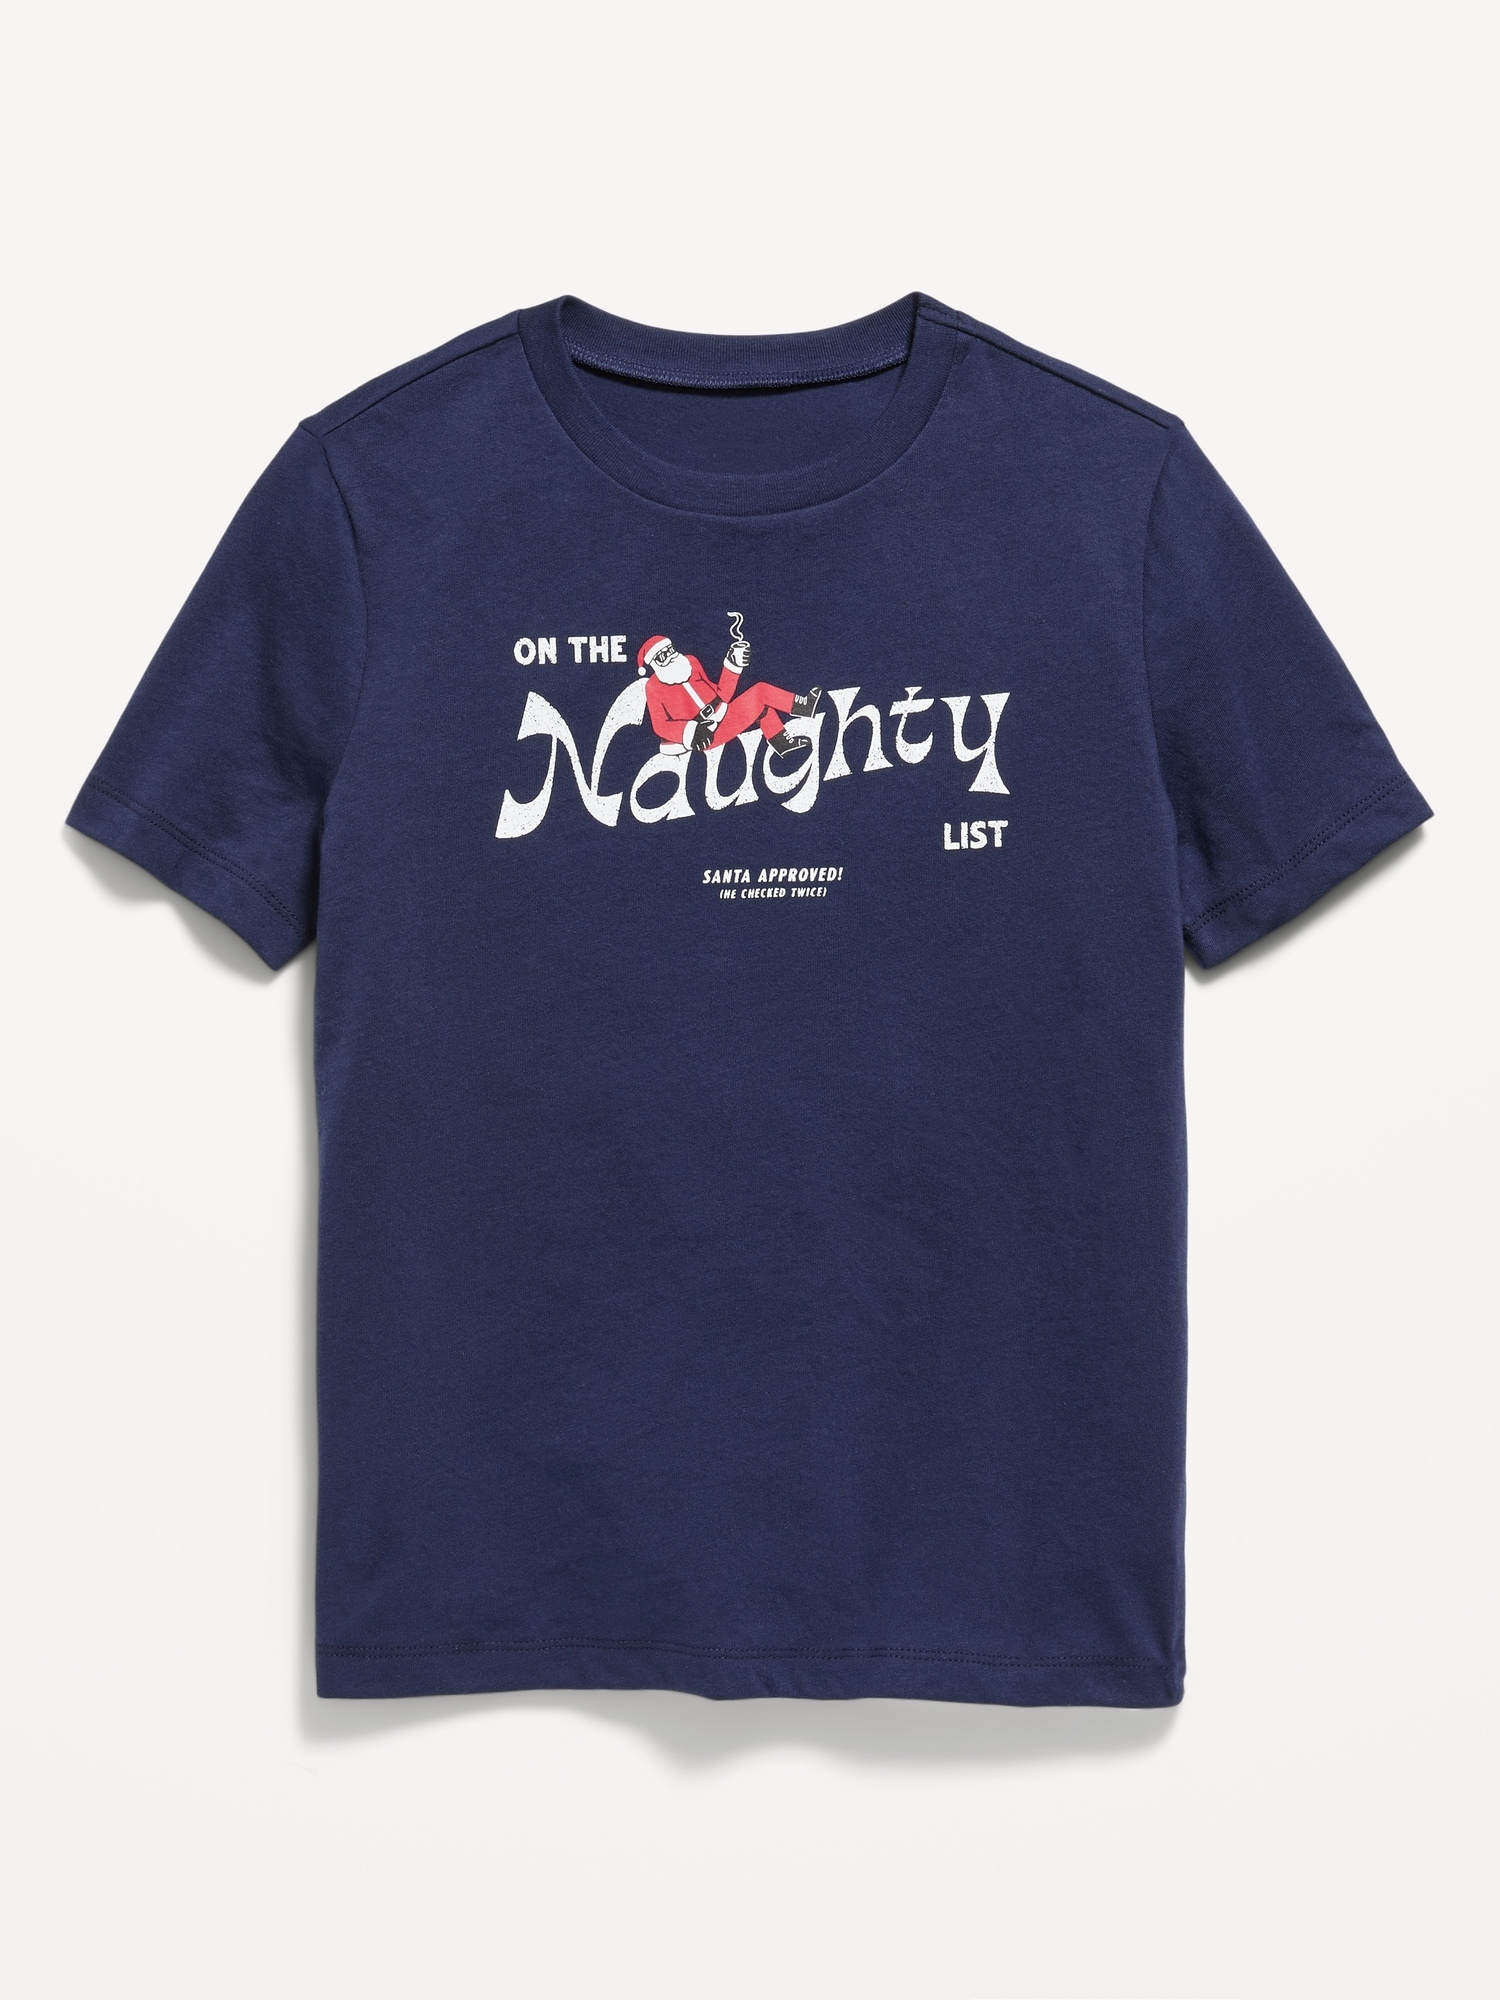 Matching Gender-Neutral Christmas Graphic T-Shirts for Kids | Old Navy